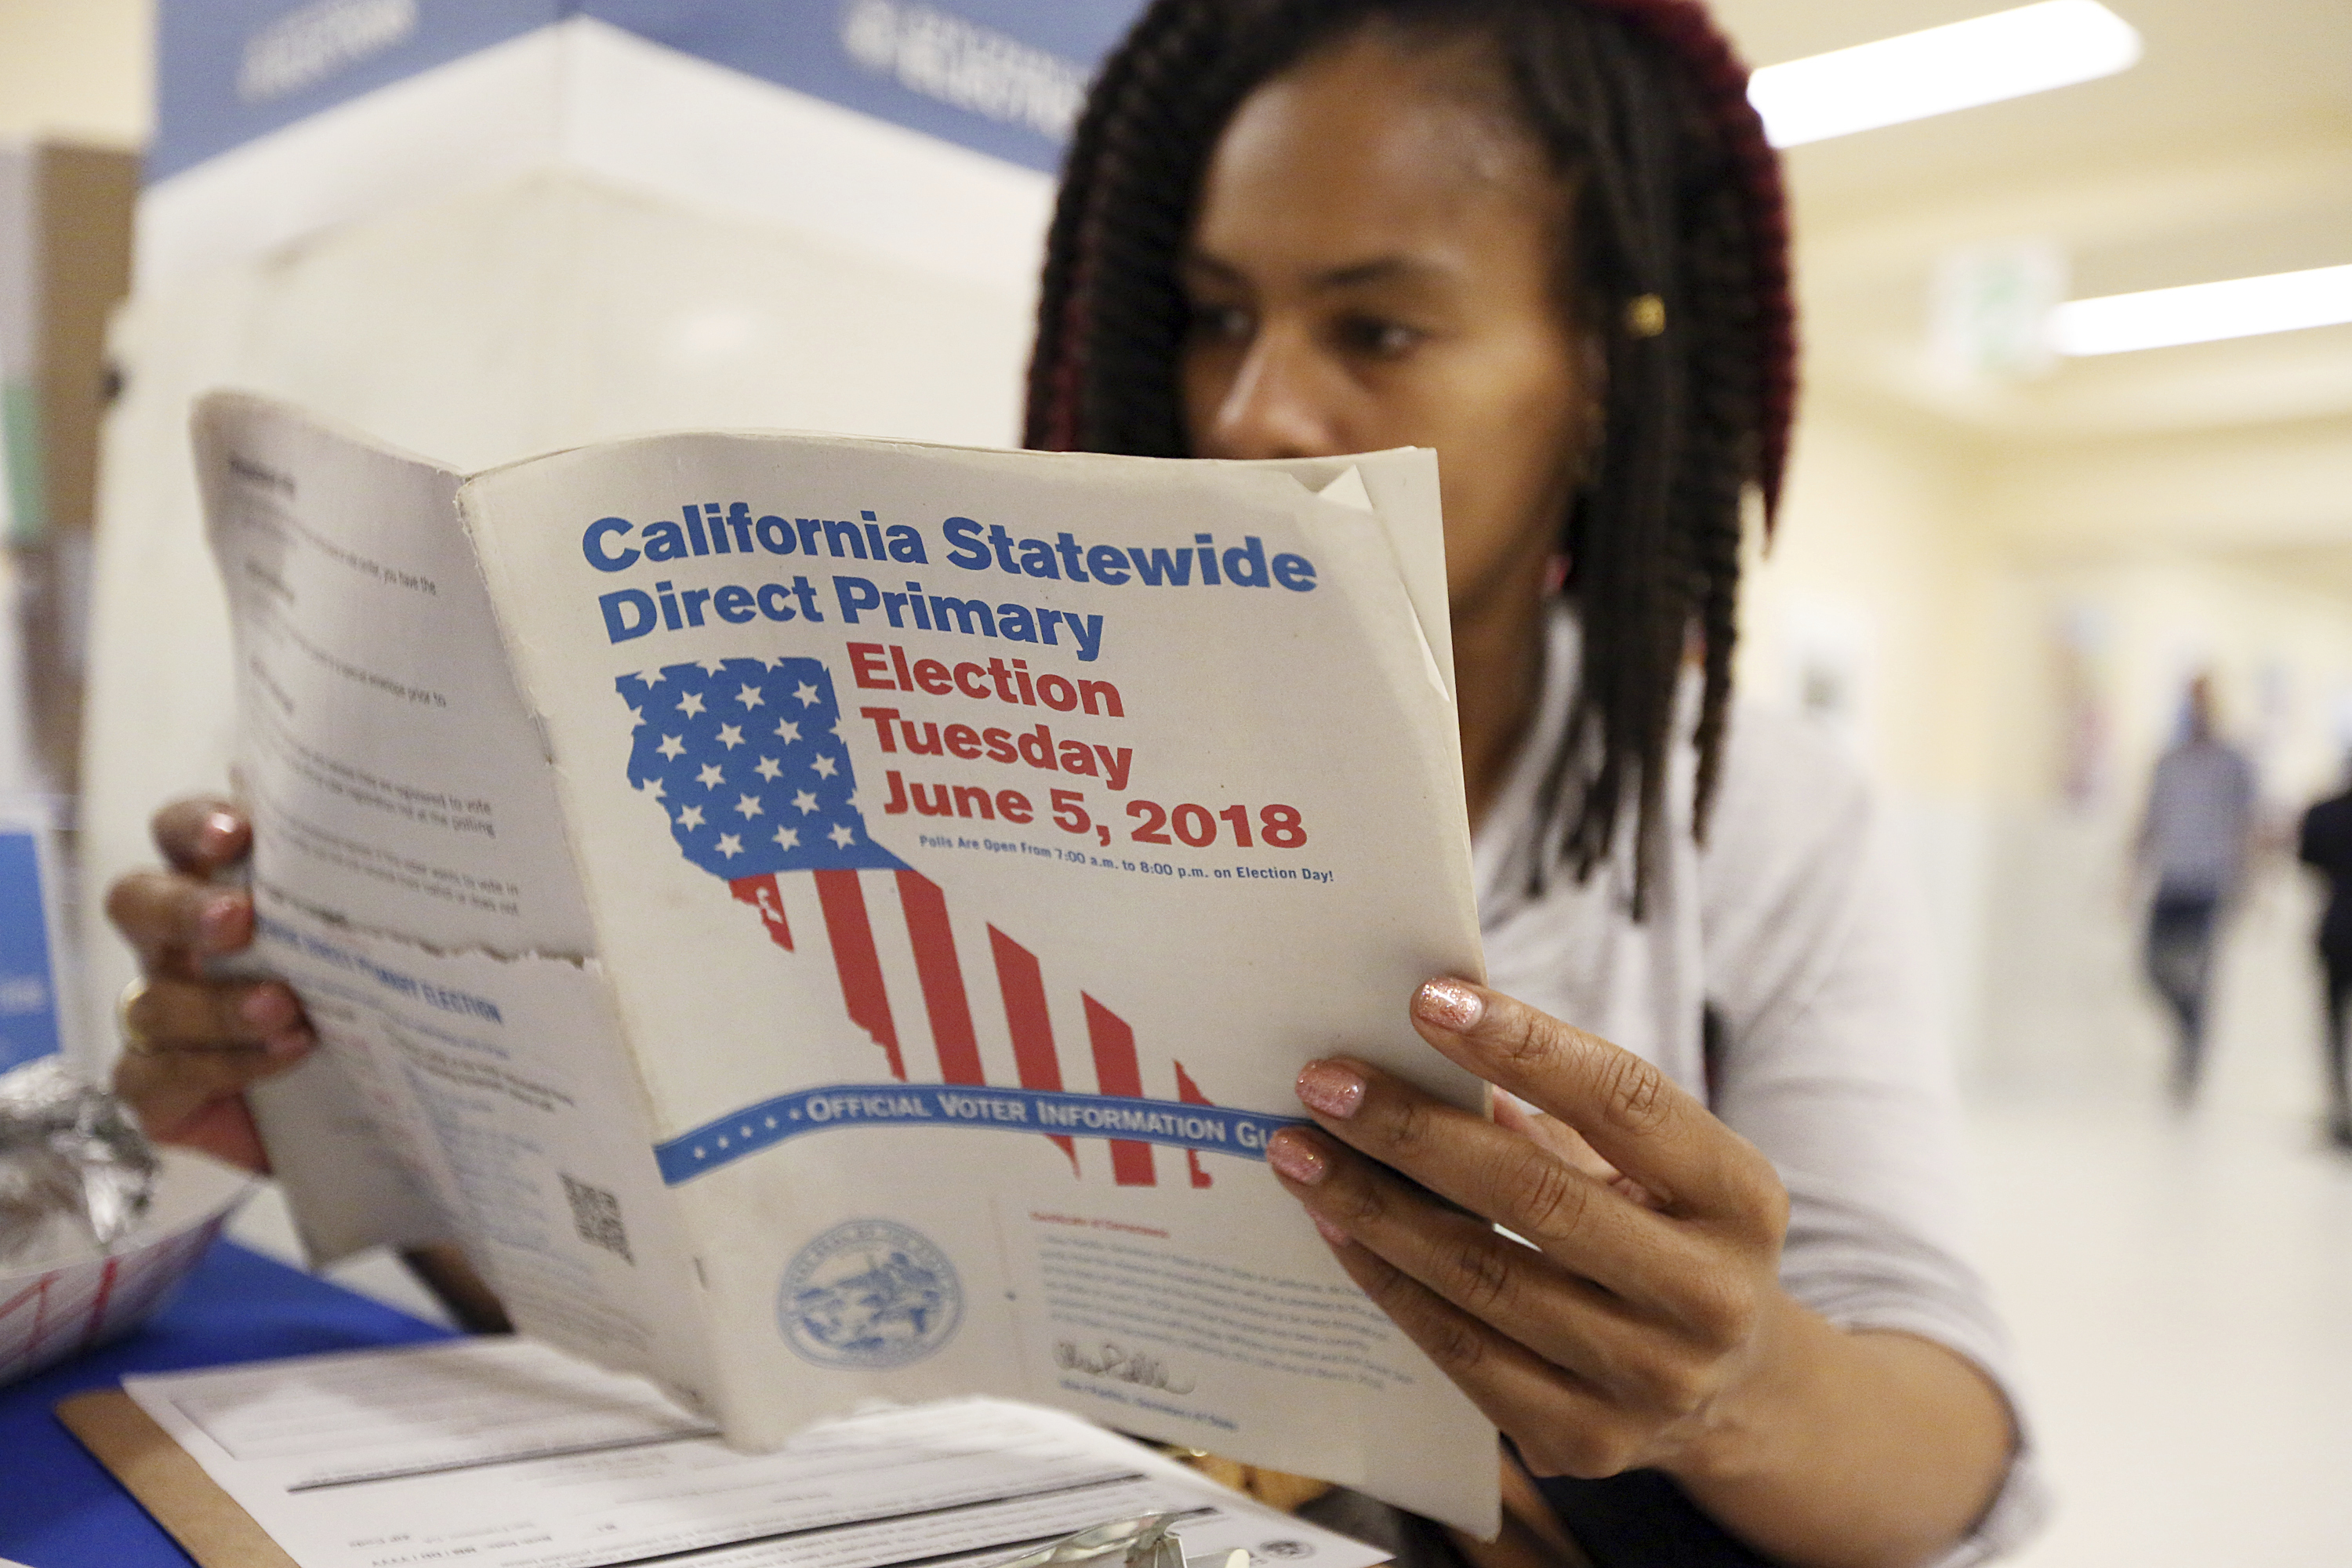 A woman reviews the California Primary election guide at San Francisco City Hall on June 5. To cover California’s key state races and propositions for voters, CALmatters created an accessible and comprehensive 2018 election guide